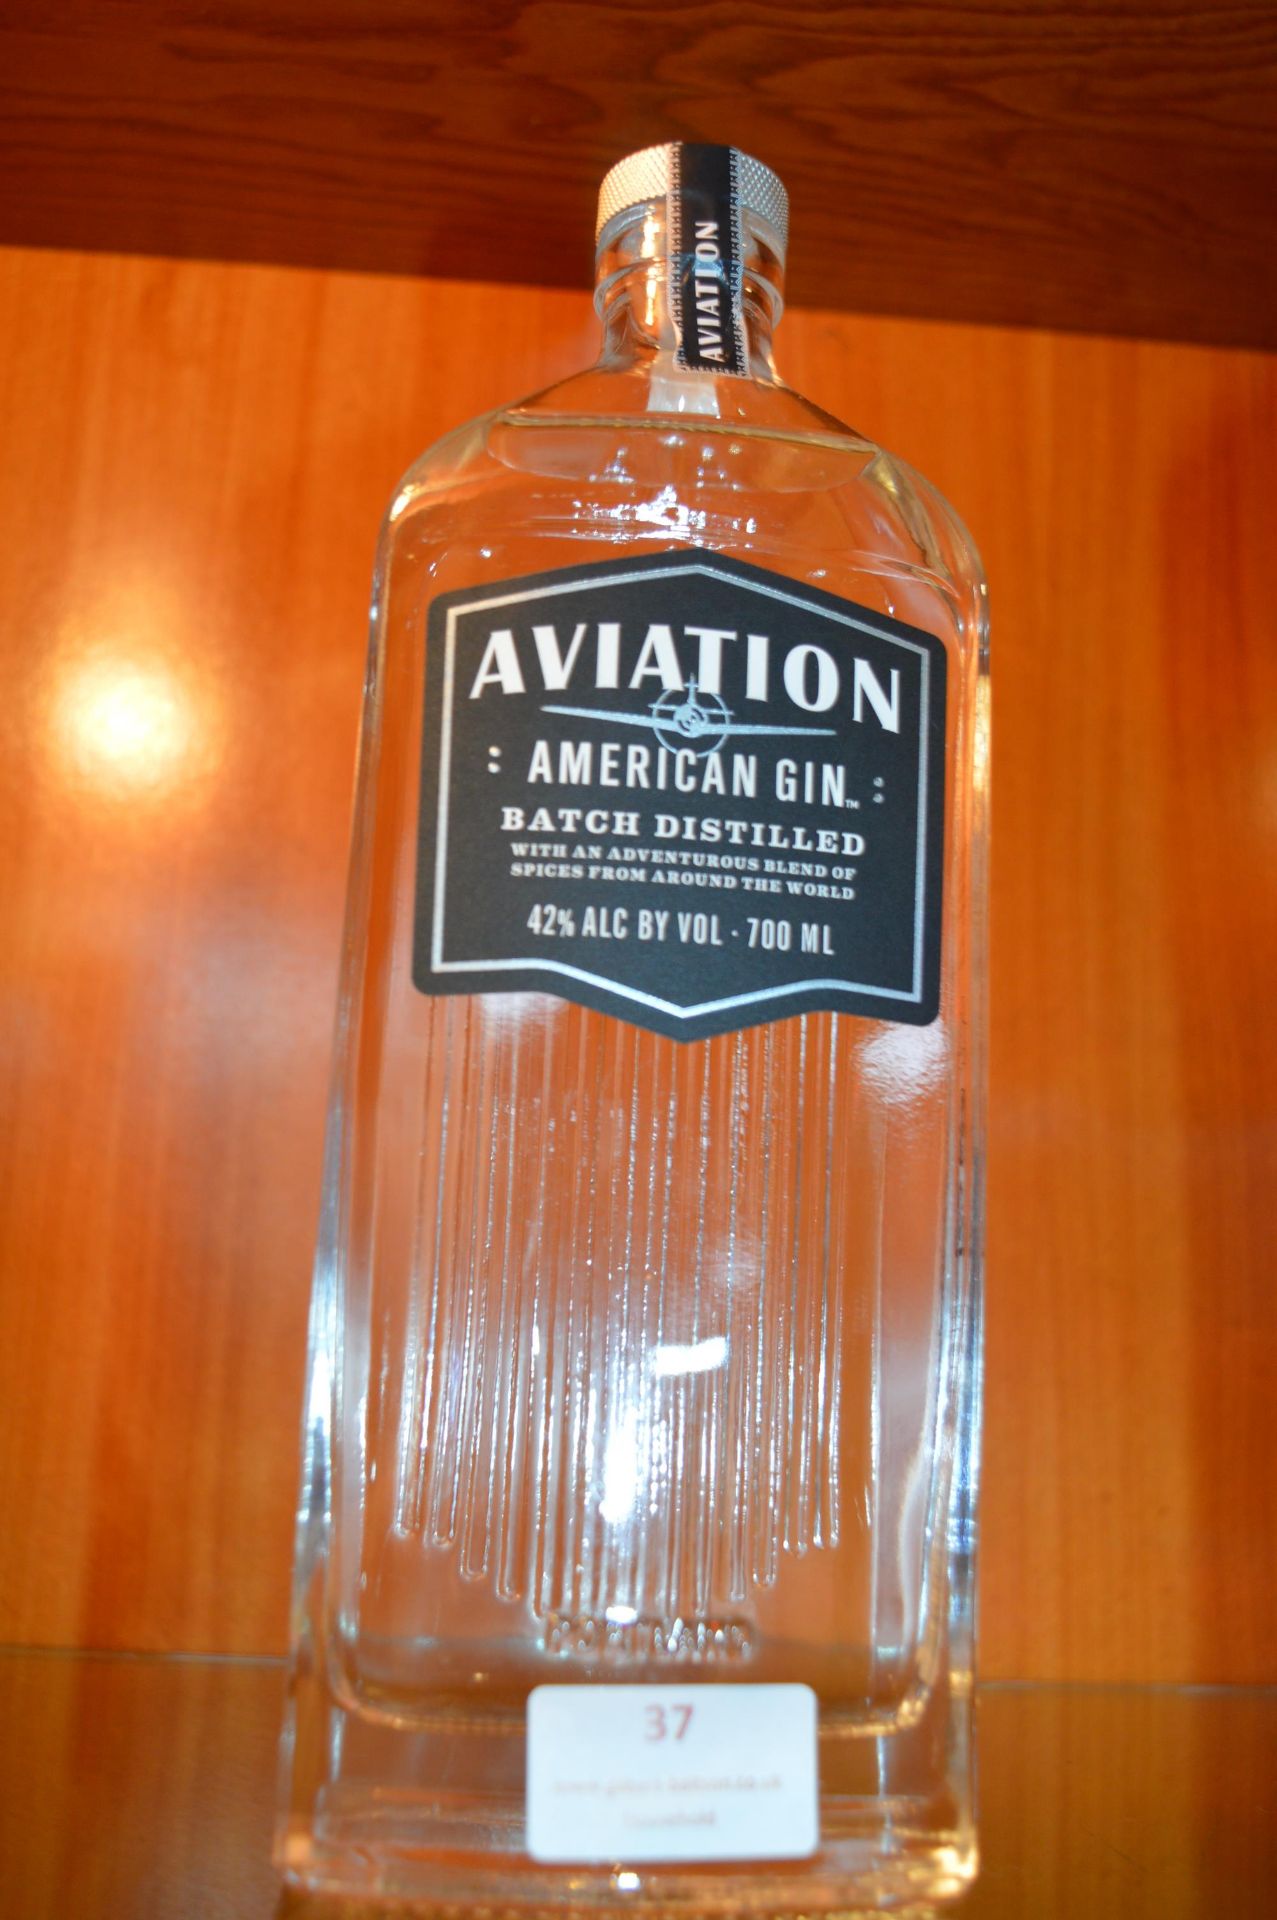 Aviation American Gin 70cl